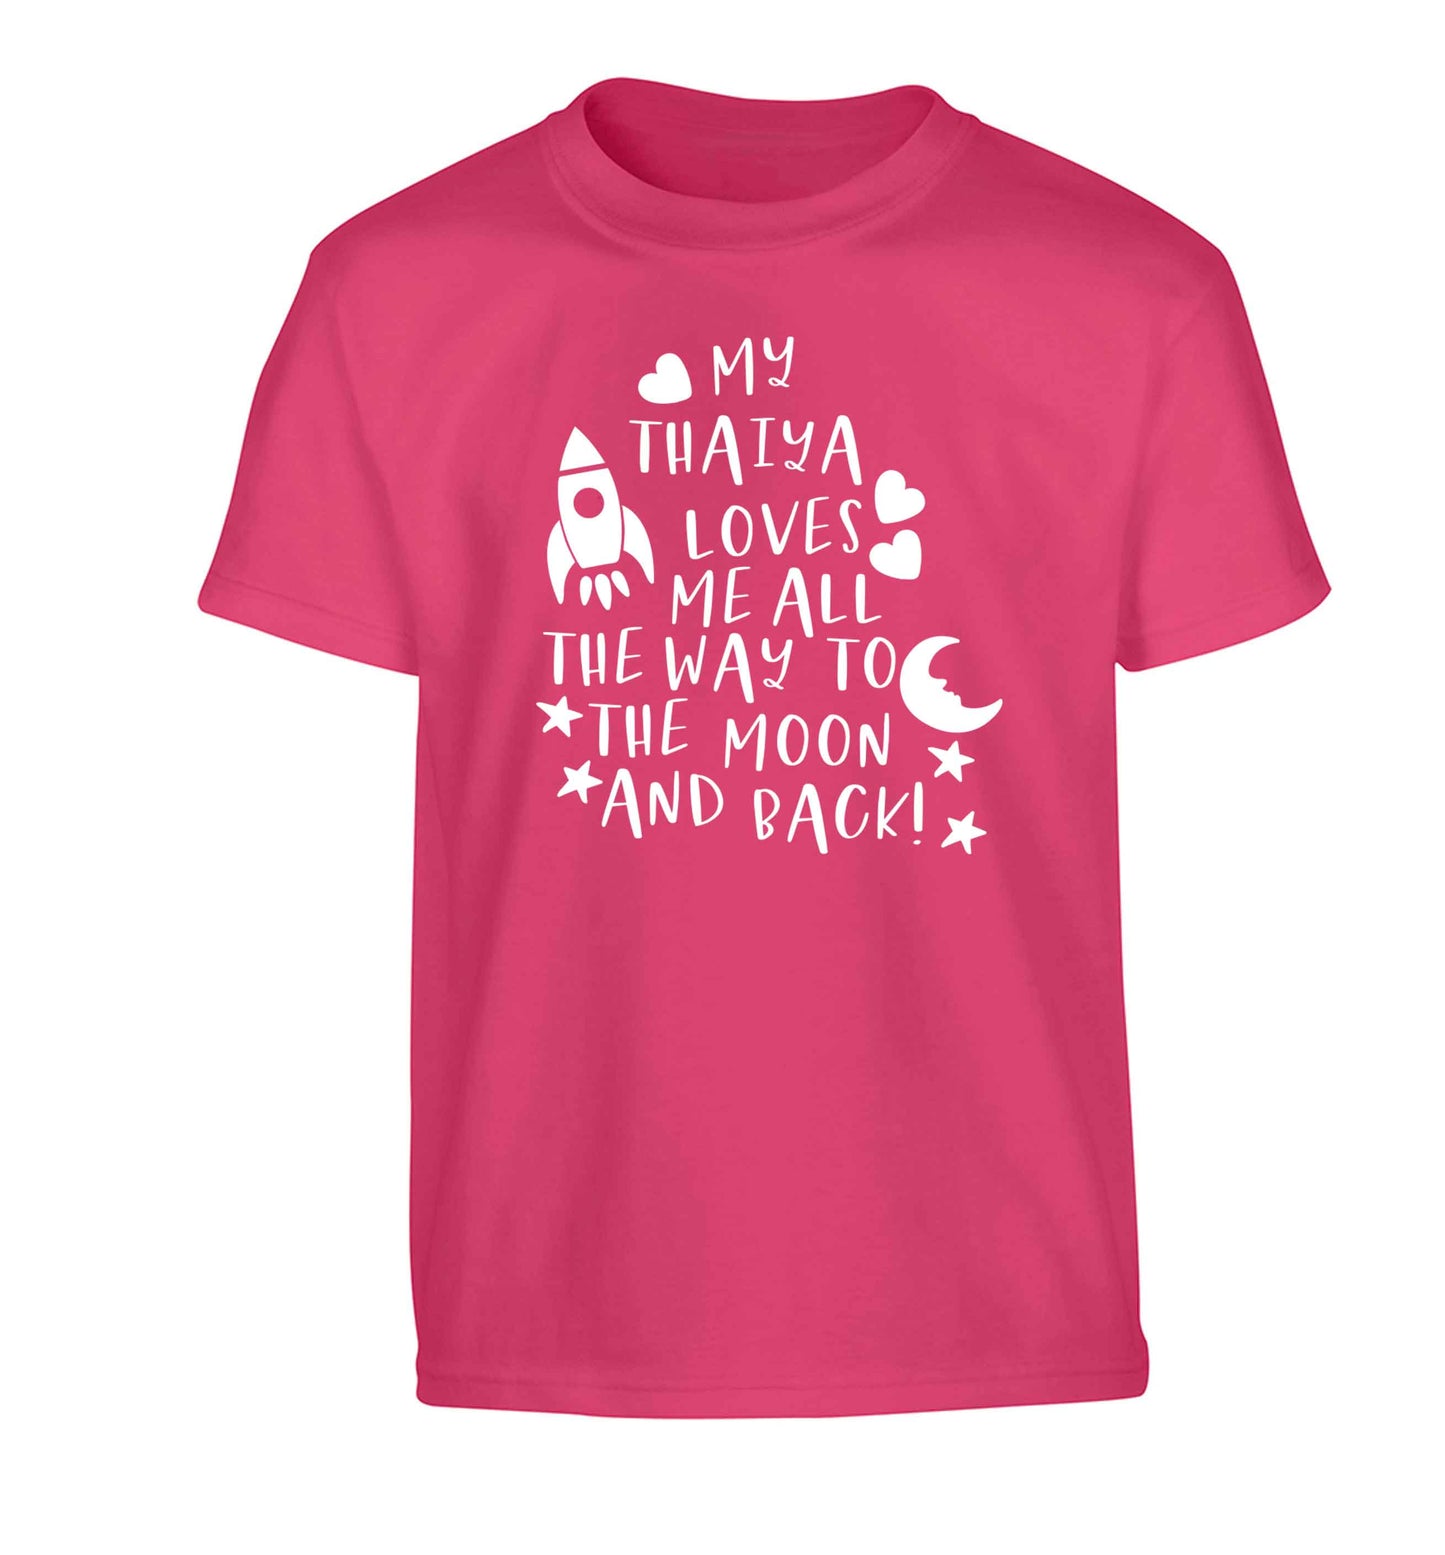 My thaiya loves me all the way to the moon and back Children's pink Tshirt 12-13 Years